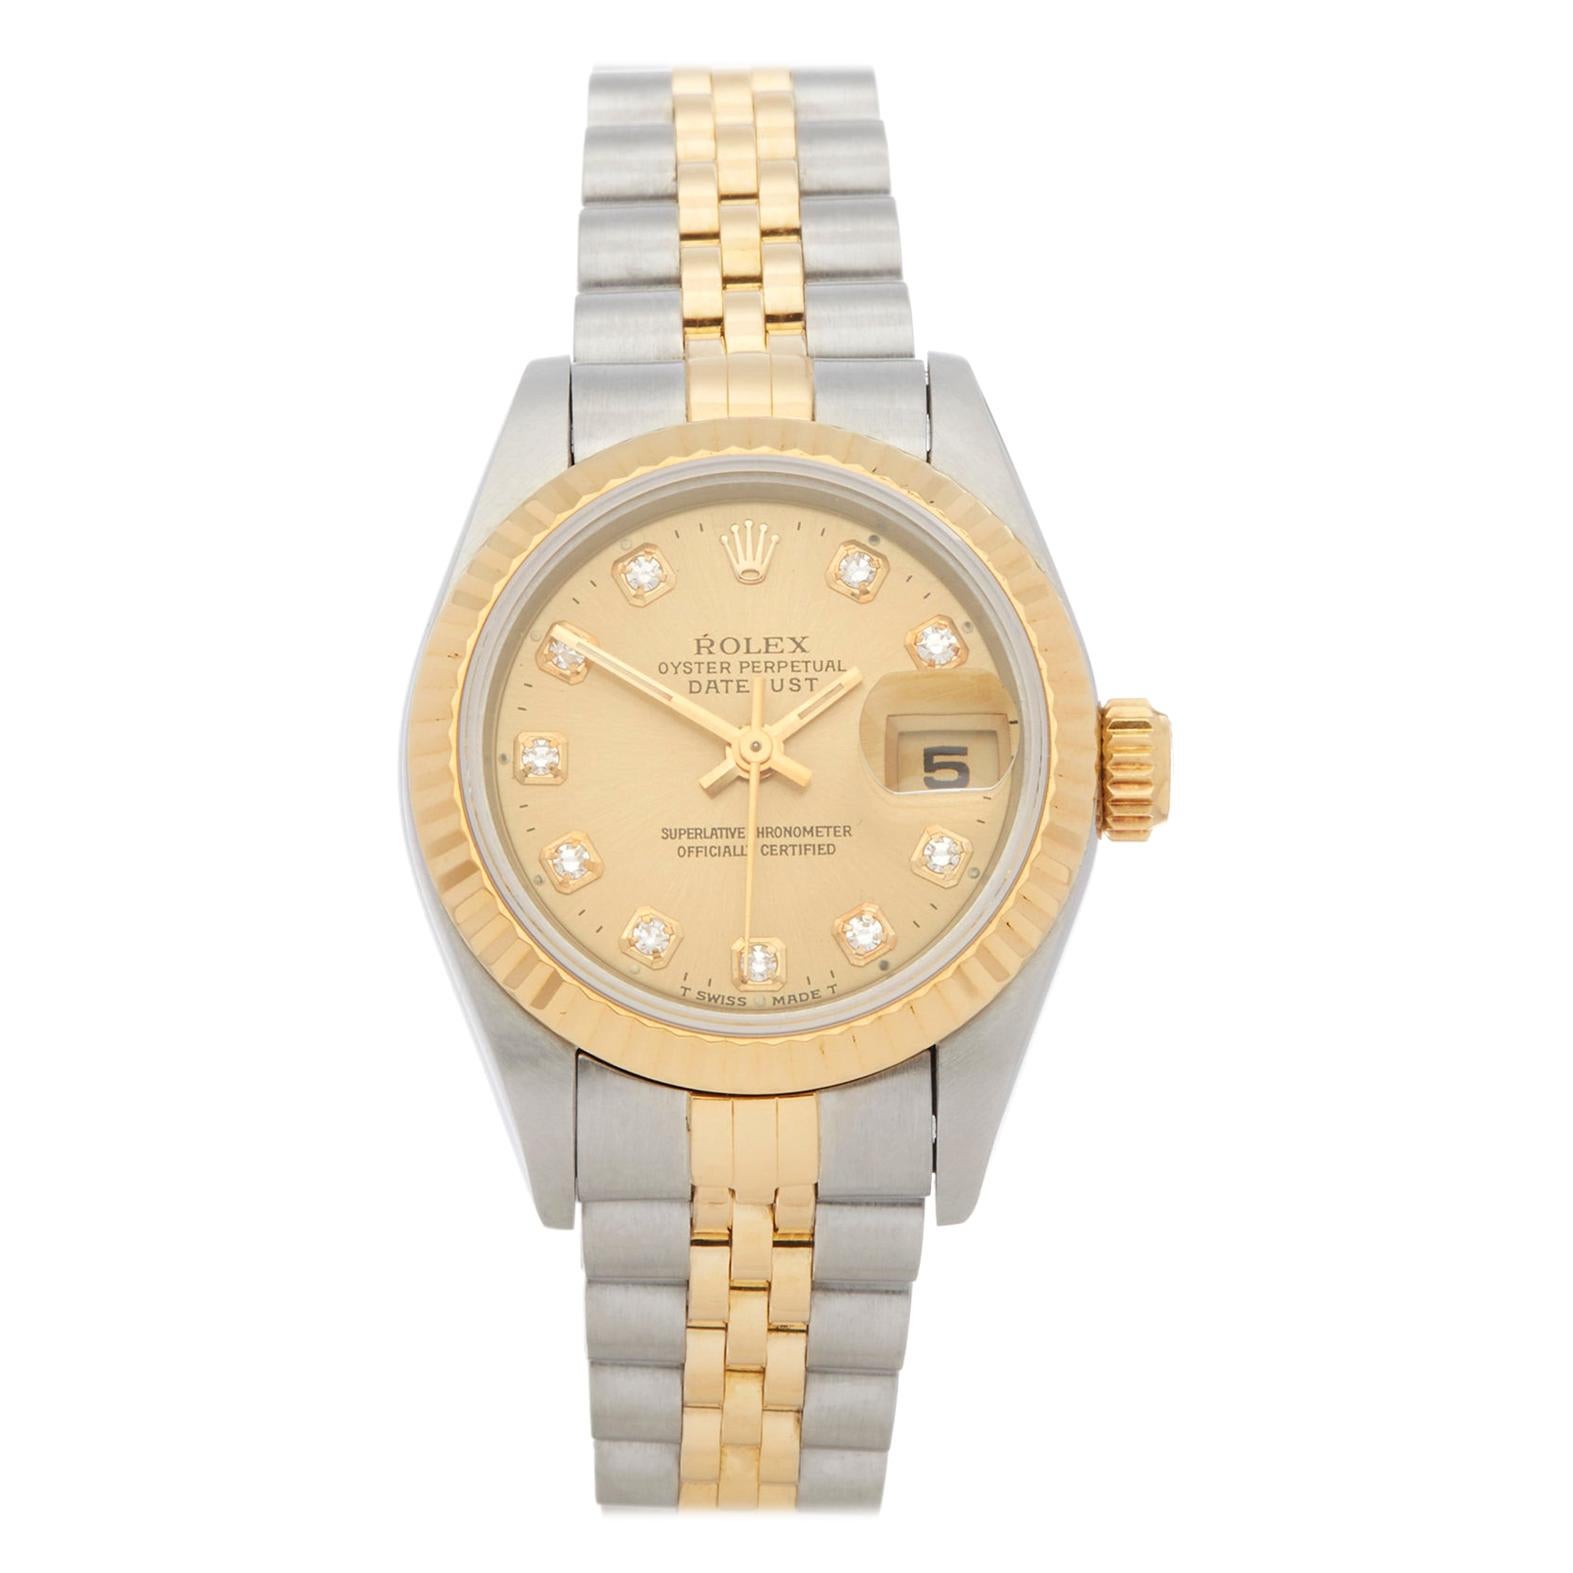 Rolex Datejust 26 Diamond Stainless Steel and Yellow Gold 69173G